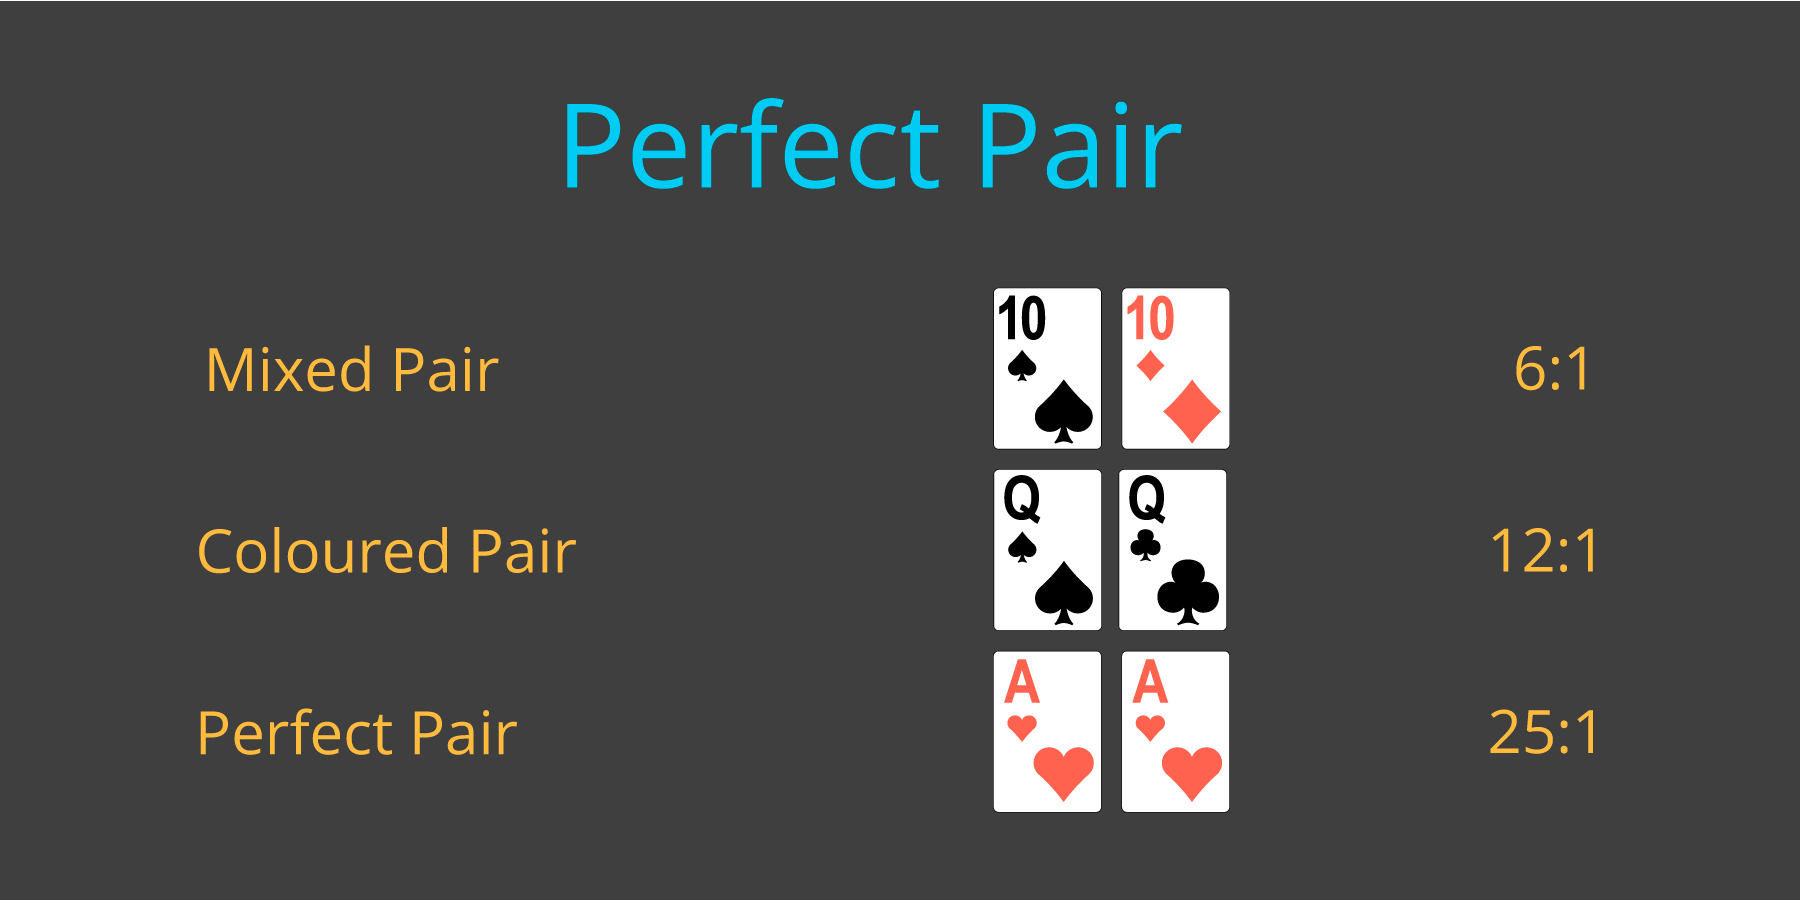 Blackjack Perfect Pair - Emirates Casino Blackjack Guide Blackjack Rules, Bets, Odds, and Payouts